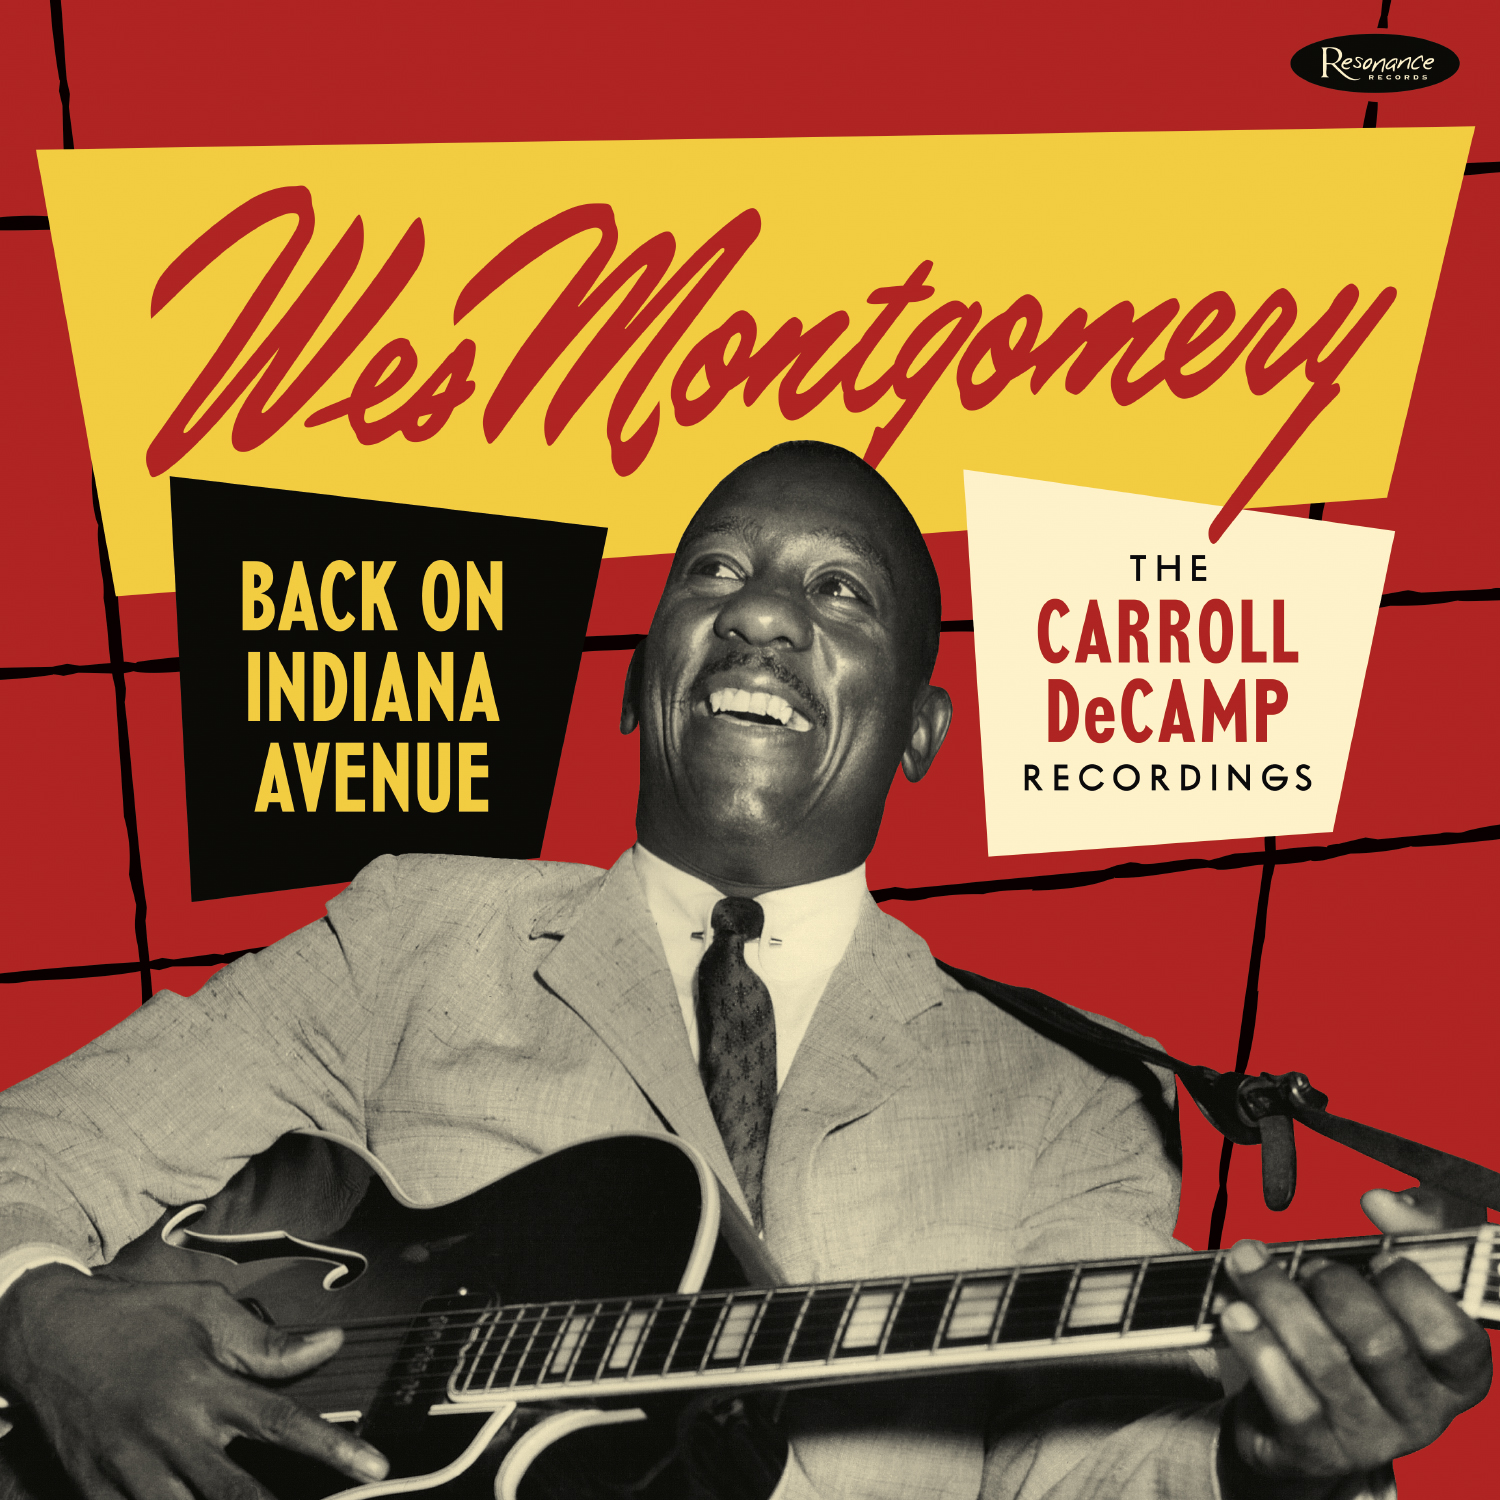 Wes-Montgomery-Back-on-Indiana-Avenue-Th